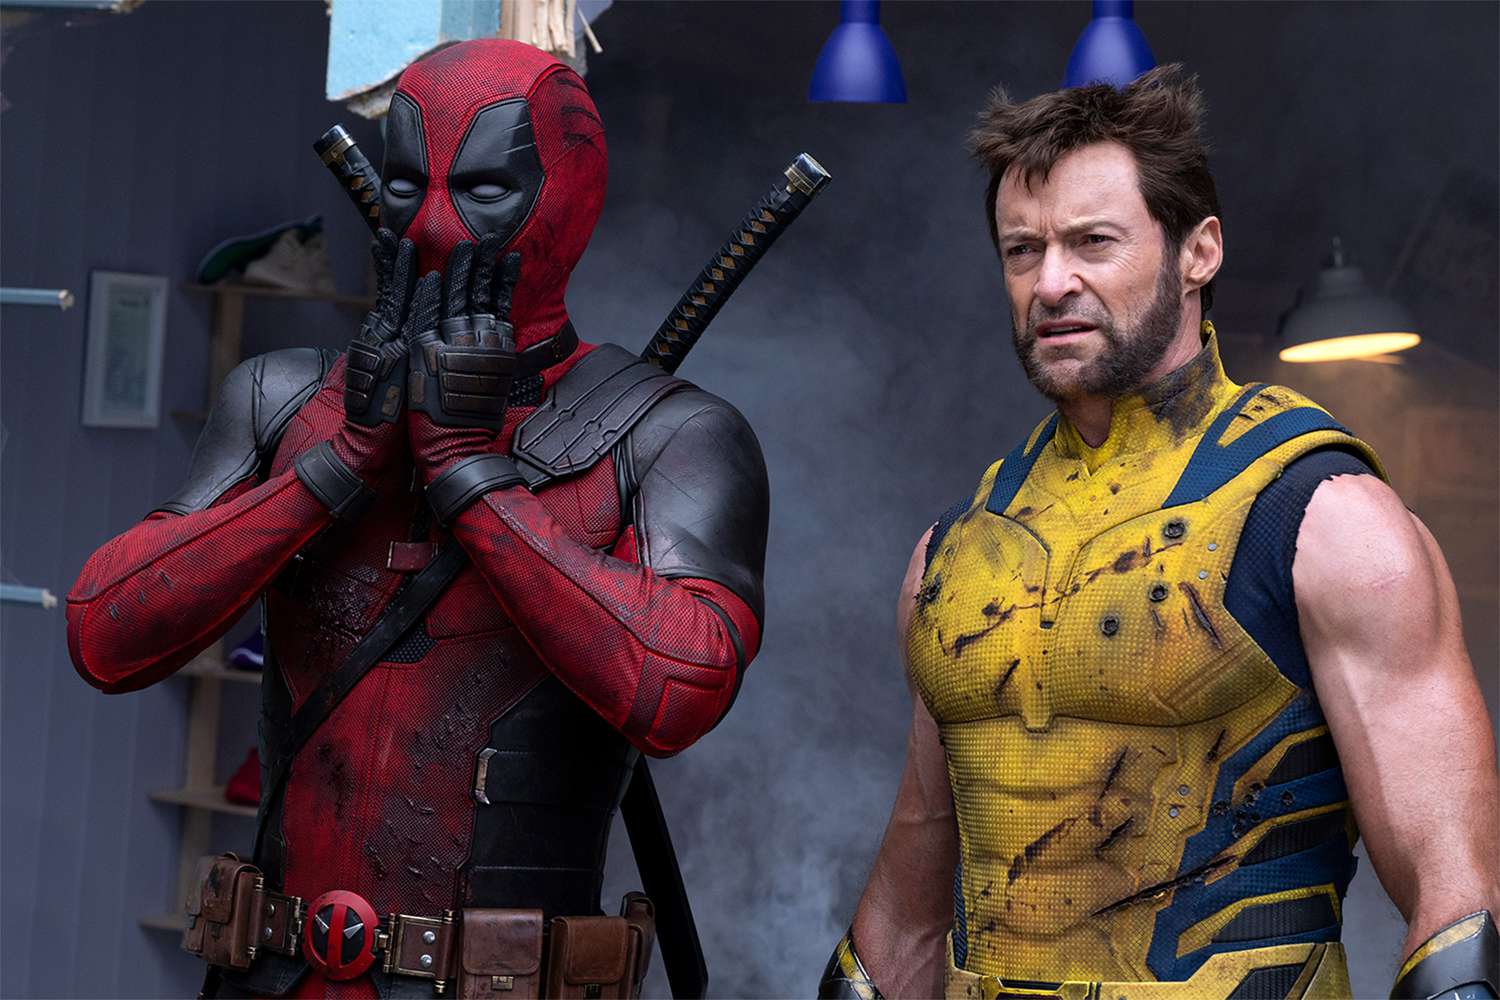 'Deadpool & Wolverine' team nearly showed a bad fake movie in theaters